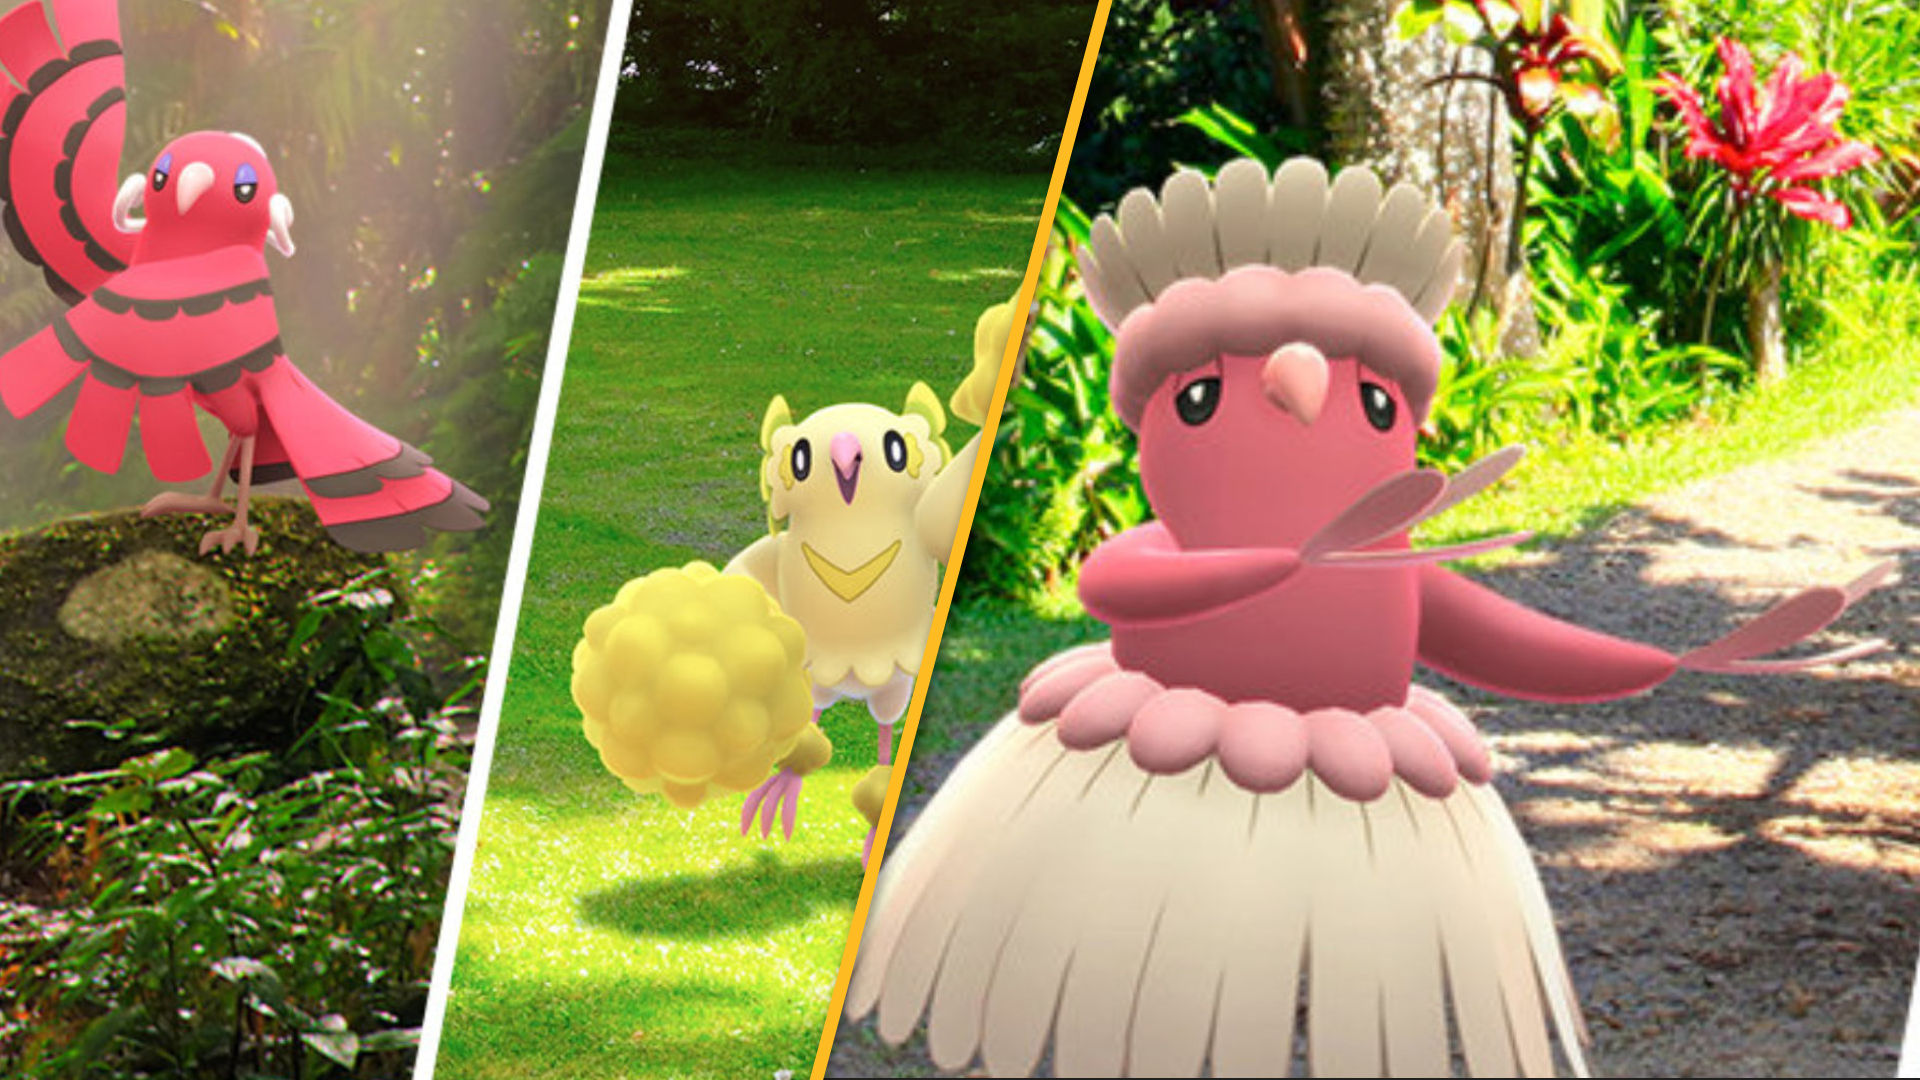 Oricorio makes its Pokémon Go debut in the Festival of Colors